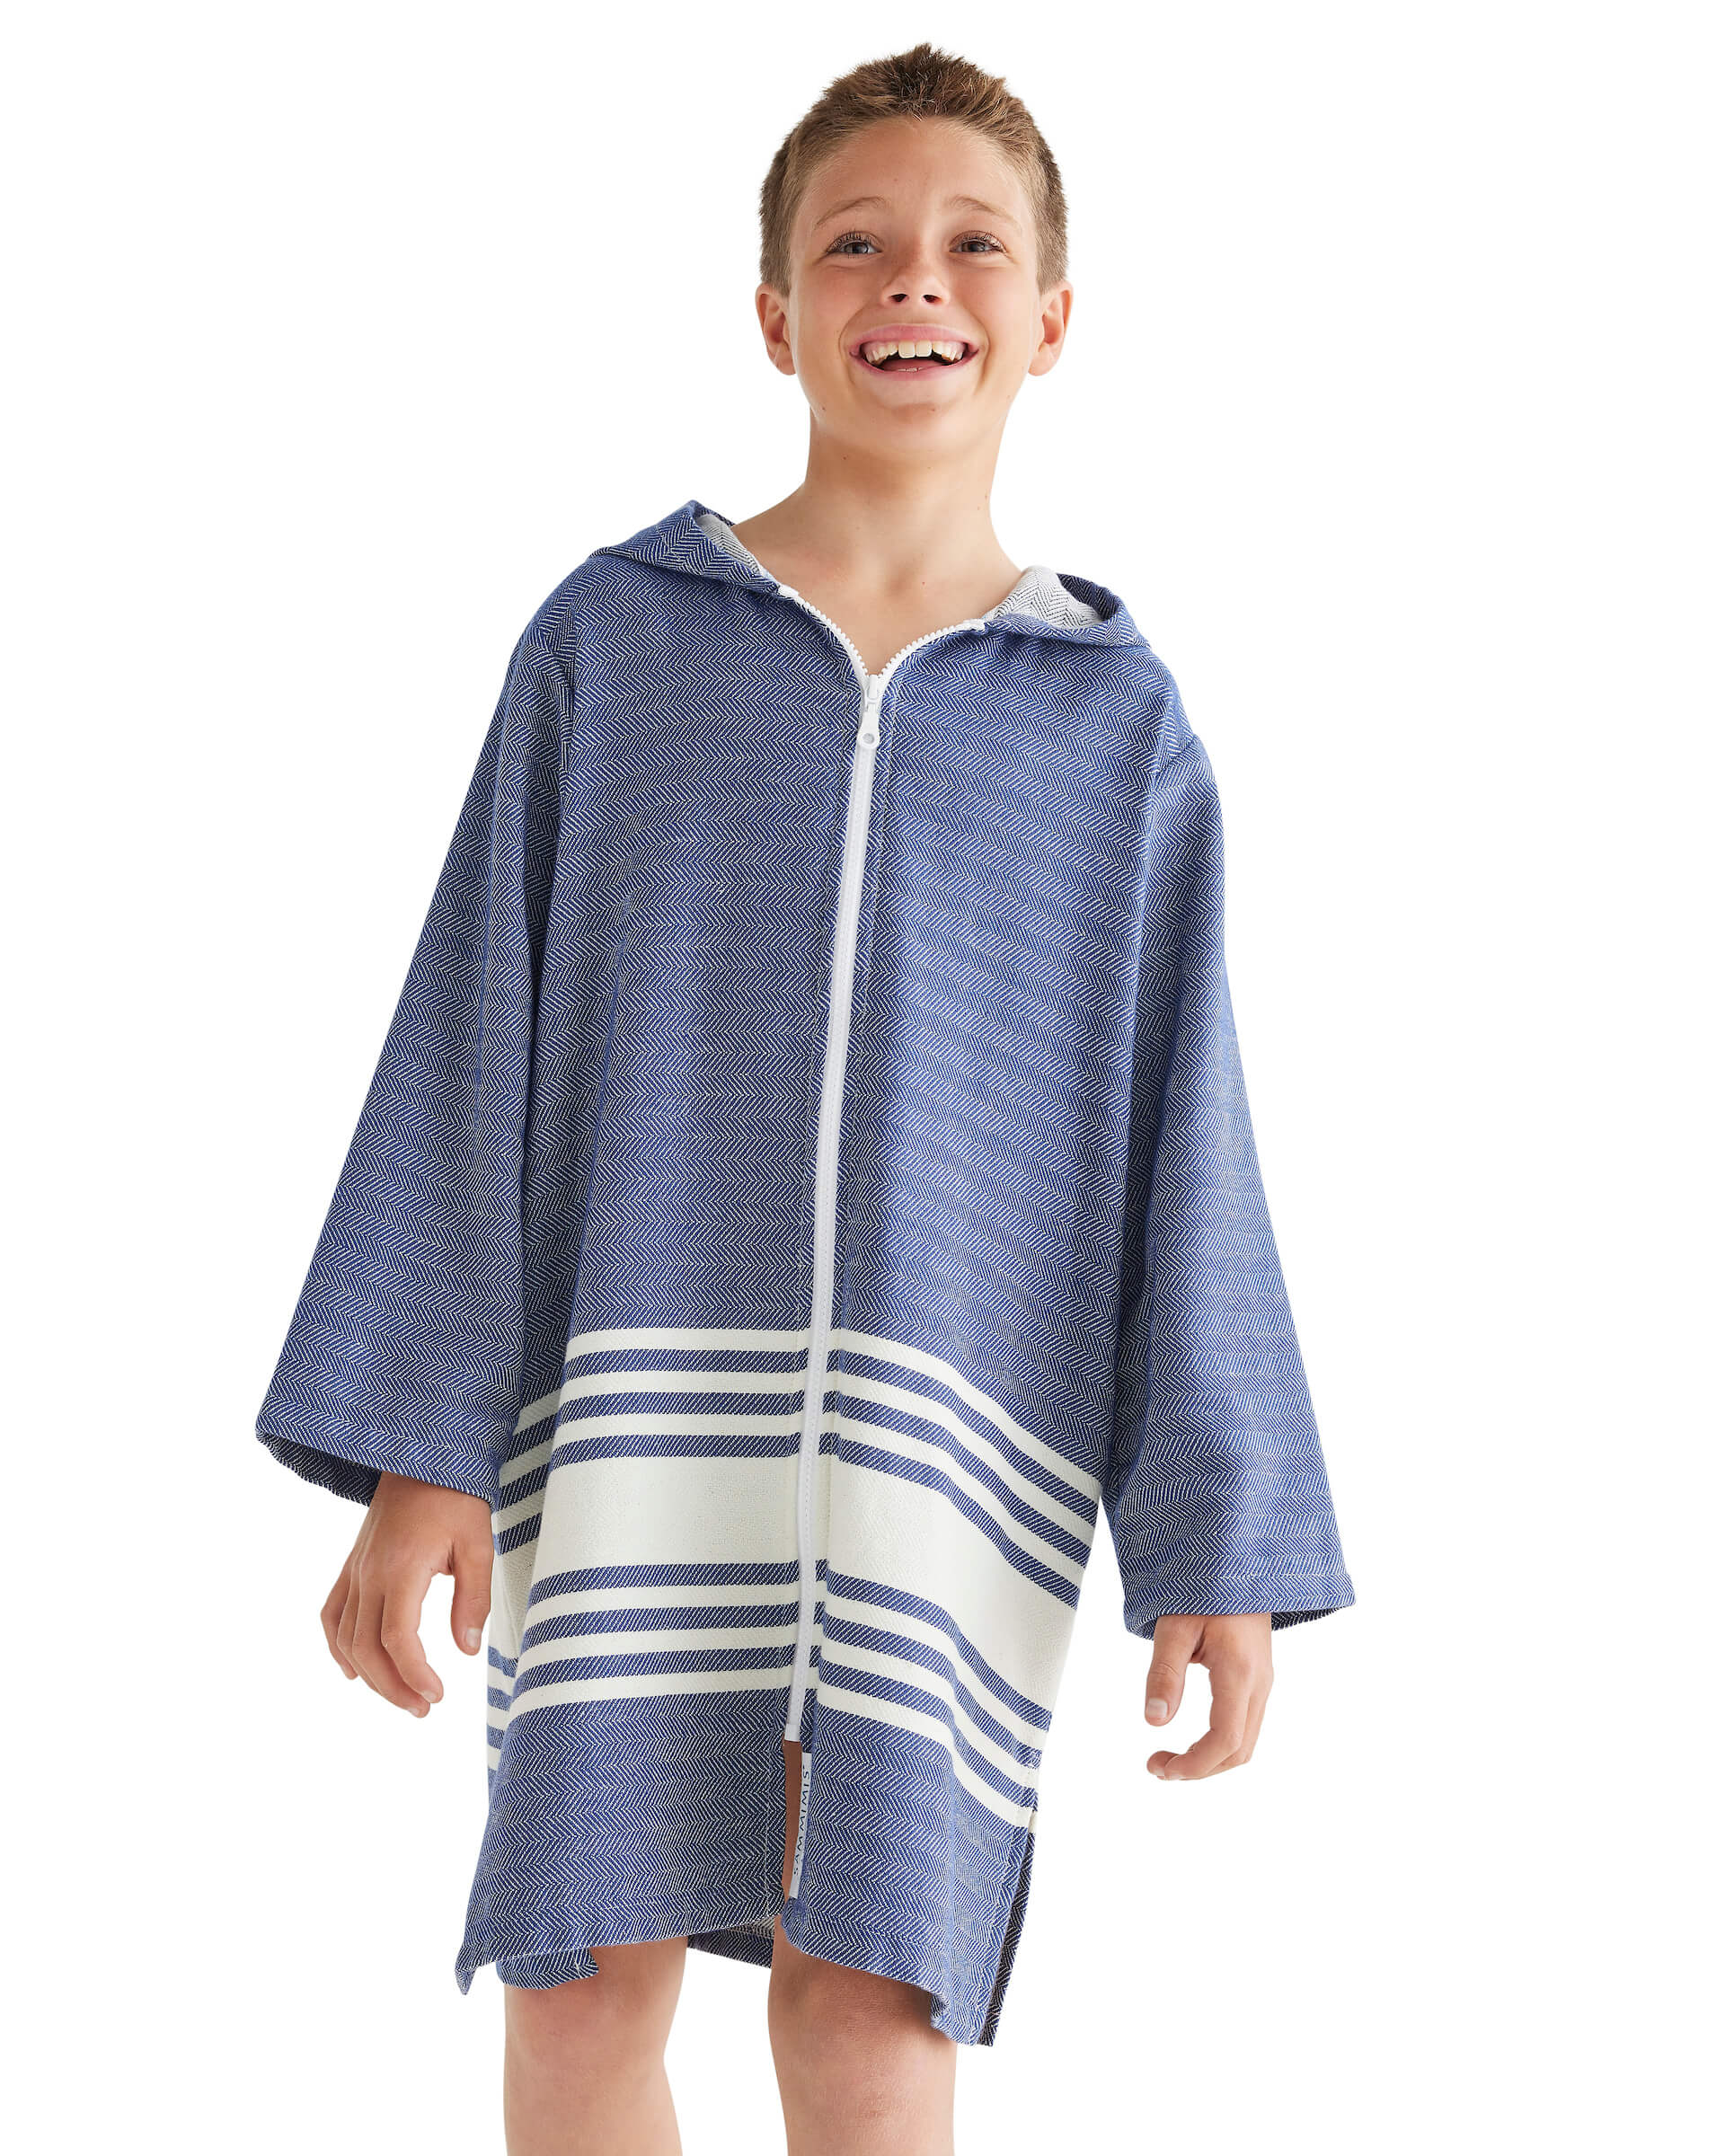 POSITANO Adult Terry Hooded Towel Plus Size: Navy/White